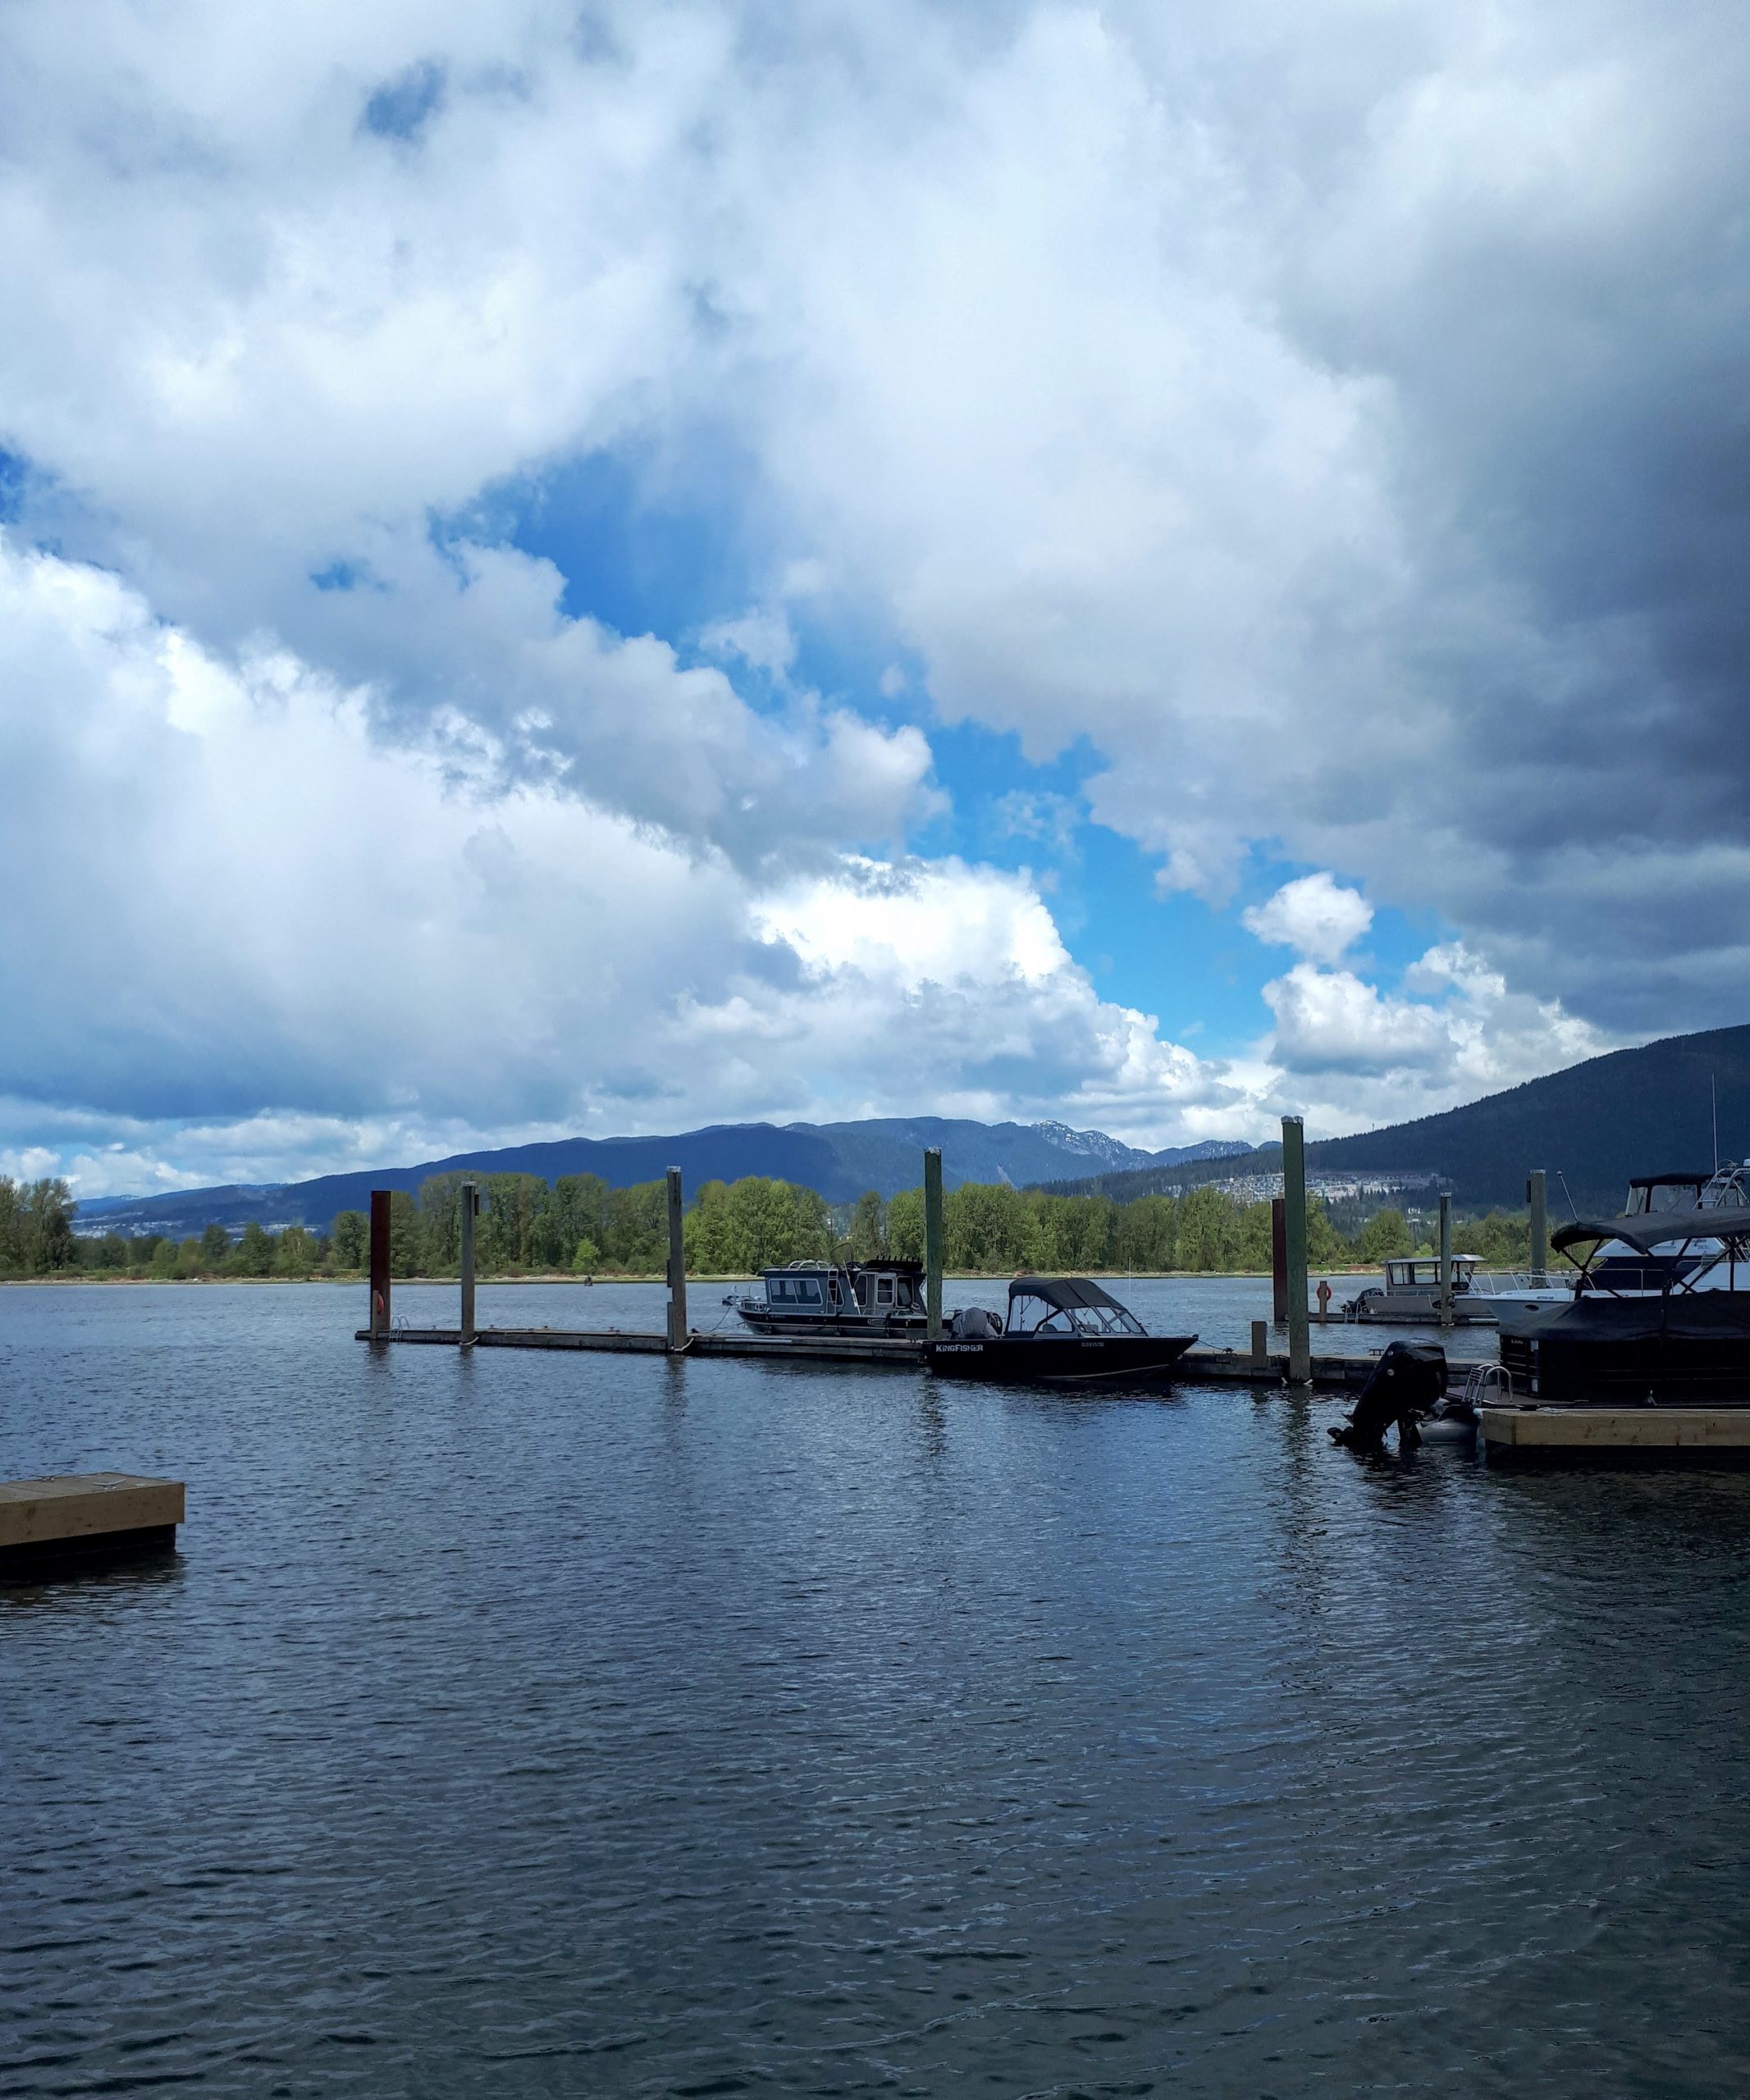 The gorgeous view at the Pitt Meadows Marina